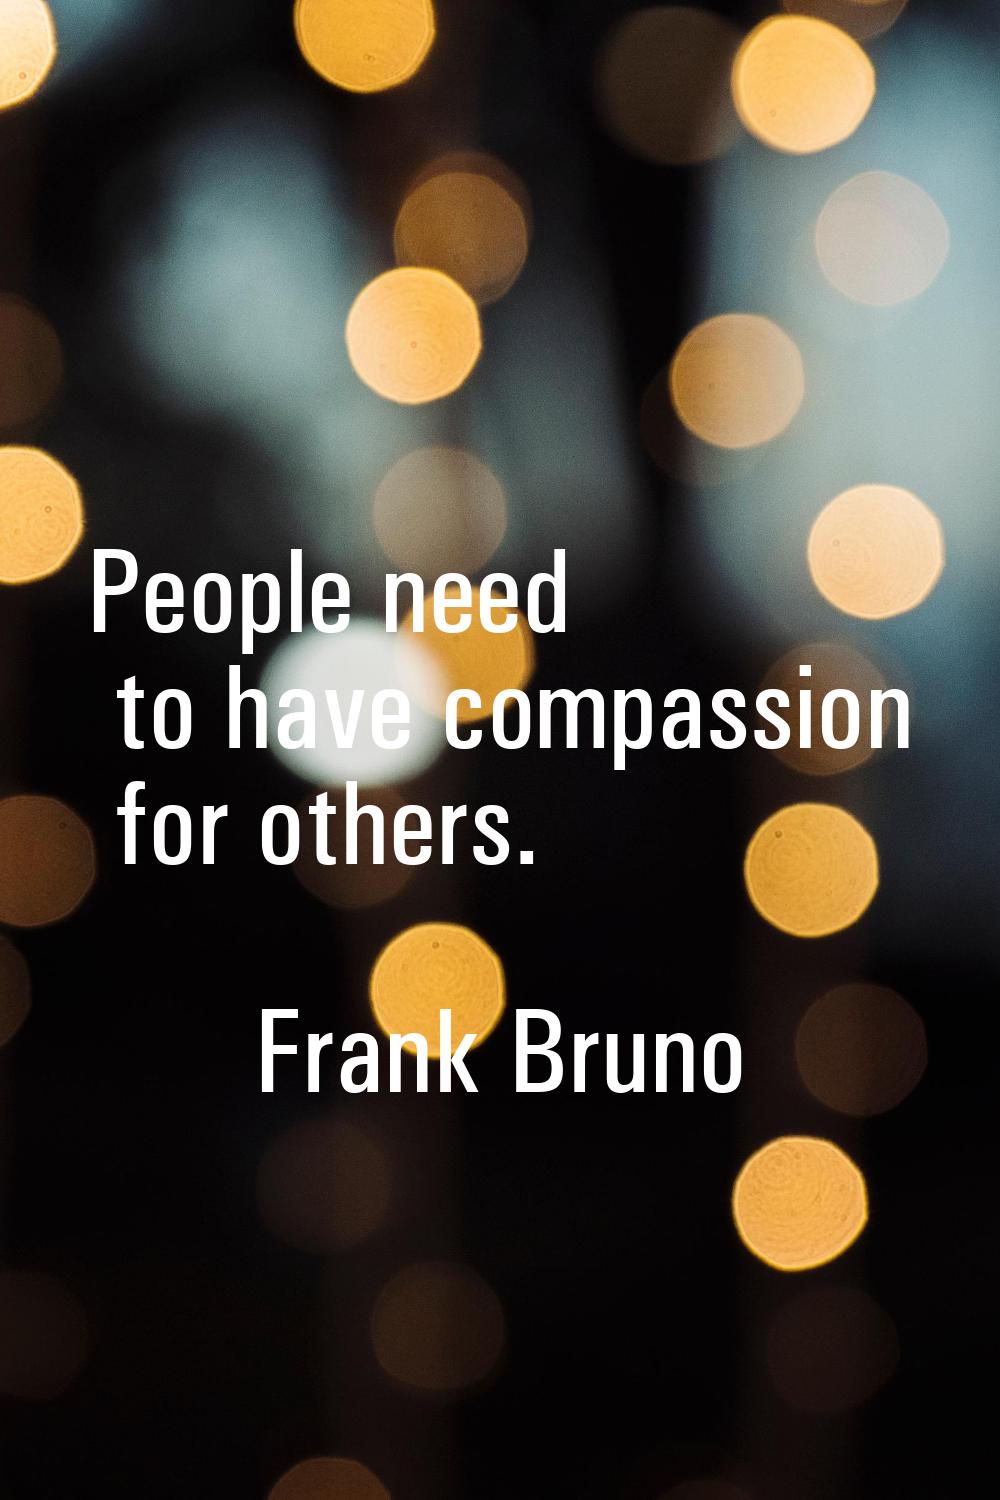 People need to have compassion for others.